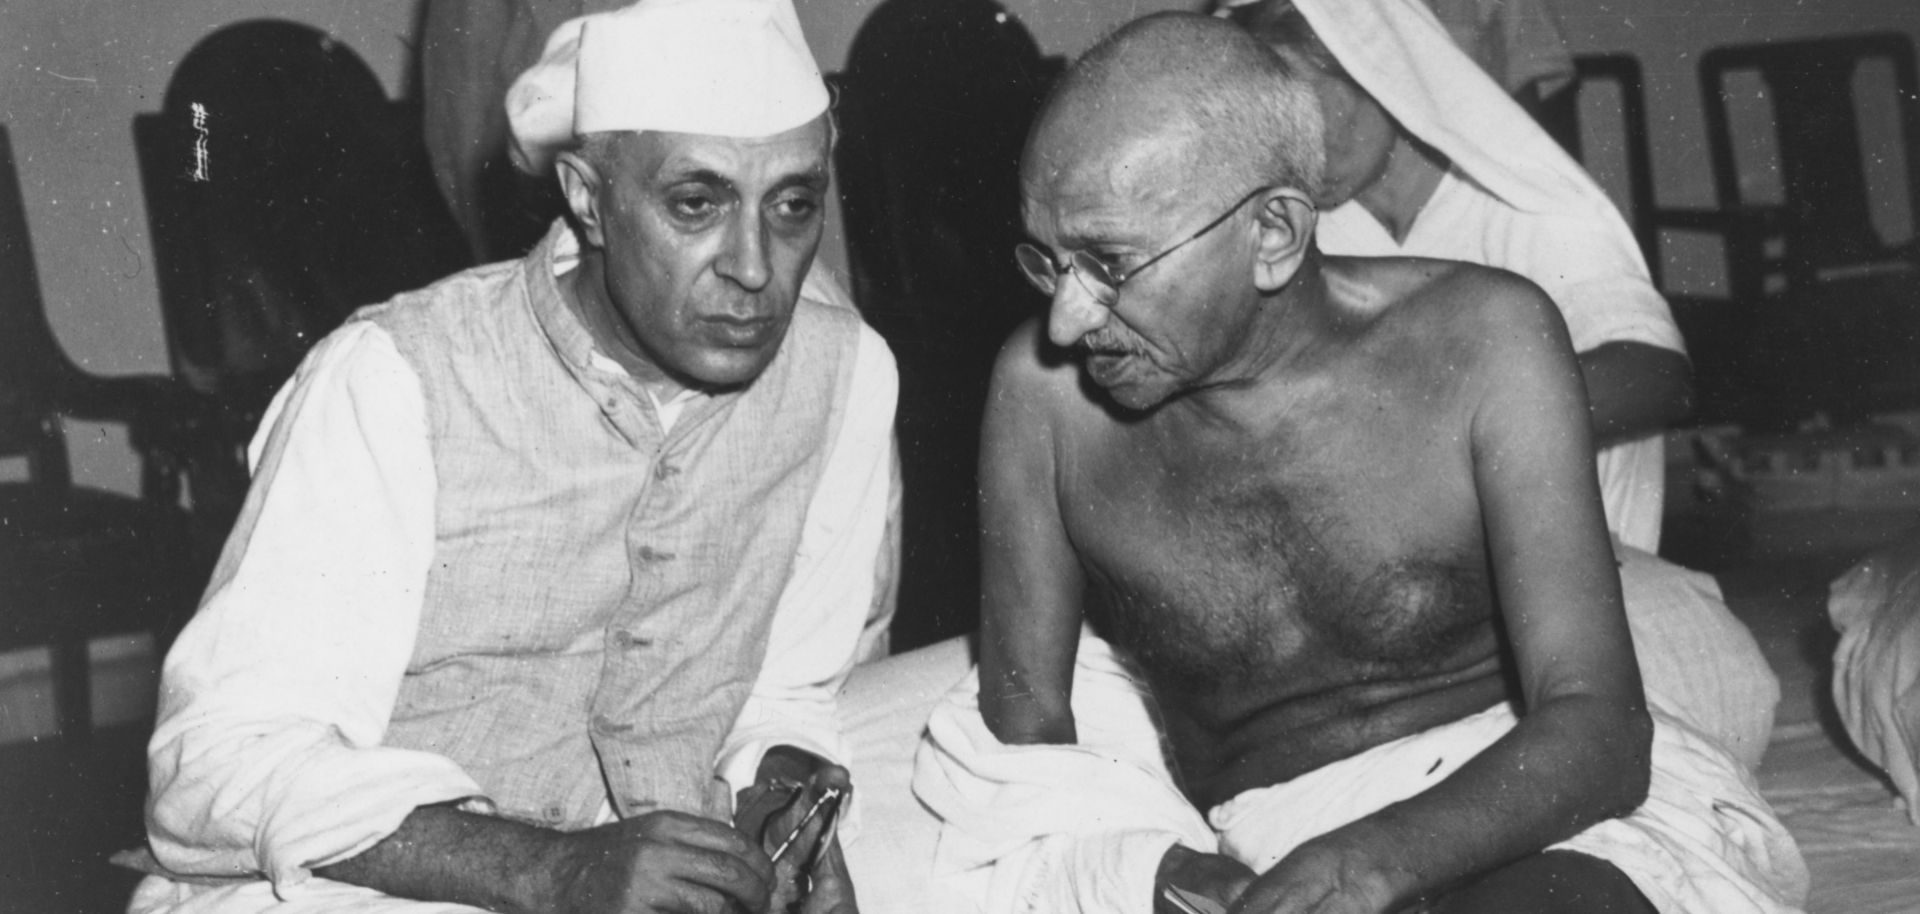 Jawaharlal Nehru (left) and Mohandas K. Gandhi talk at a committee meeting in Bombay.